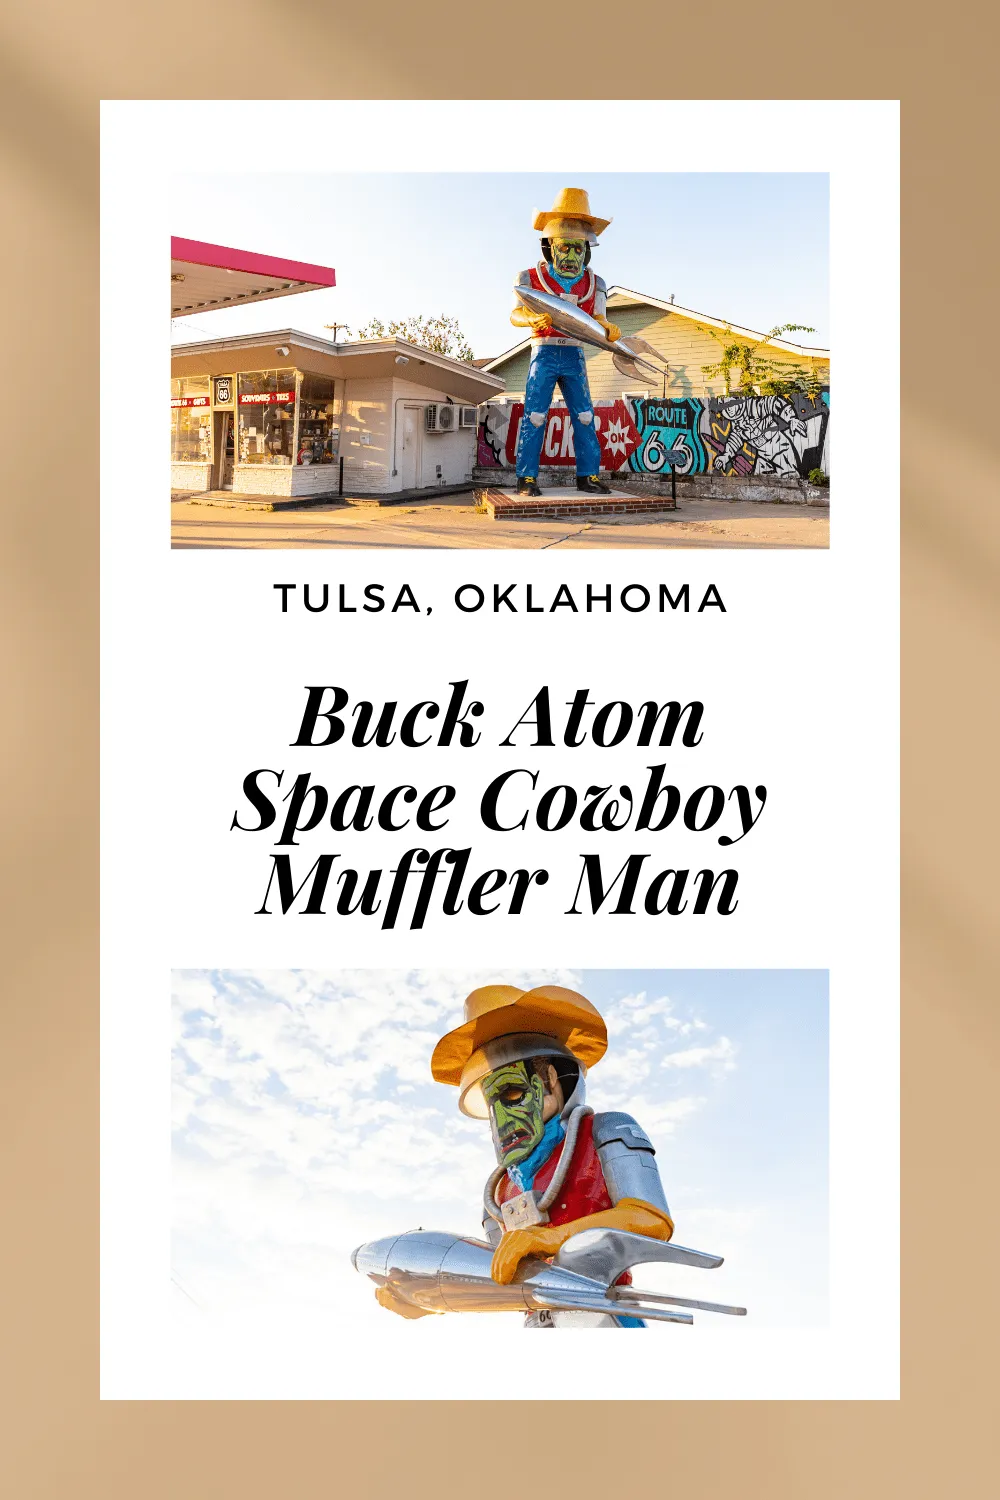 Buck Atom’s Cosmic Curios on 66 opened on Route 66 in 2018. The quirky souvenir shop is located in Tulsa, Oklahoma in a repurposed classic 1950’s PEMCO gas station. A year after opening the shop's mascot, a space cowboy named Buck Atom, was brought to life in the most spectacular of ways: with a giant fiberglass Buck Atom Space Cowboy Muffler Man.  #Route66 #Route66RoadTrip #OklahomaRoadsideAttractions #RoadsideAttraction #RoadTrip #OklahomaRoadTrip #MufflerMan